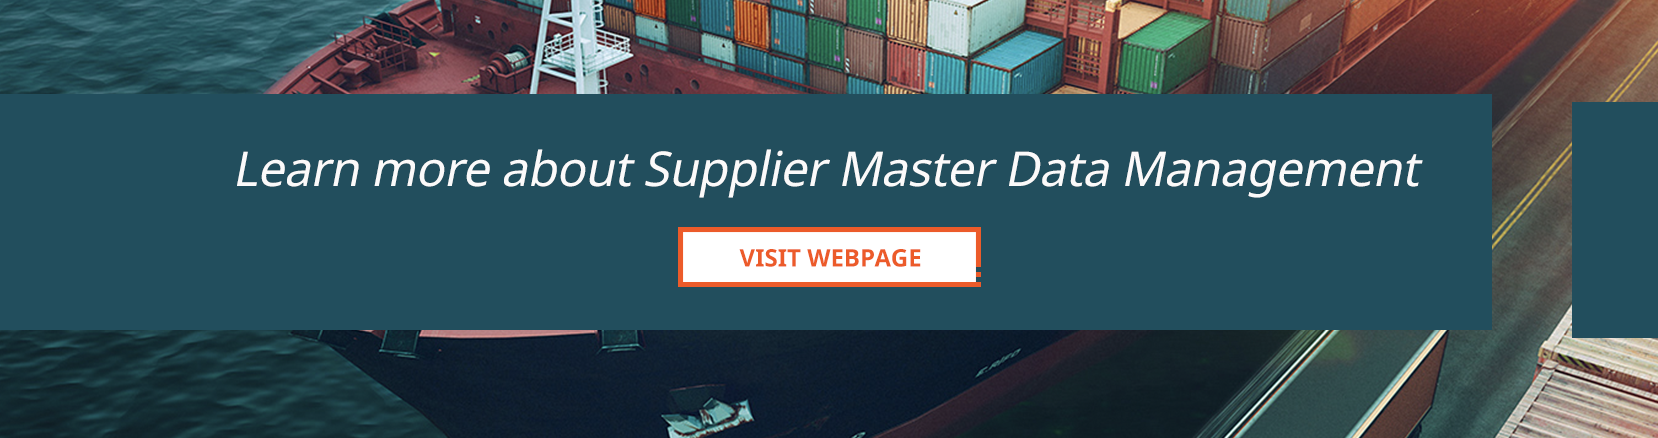 learn more about supplier master data management